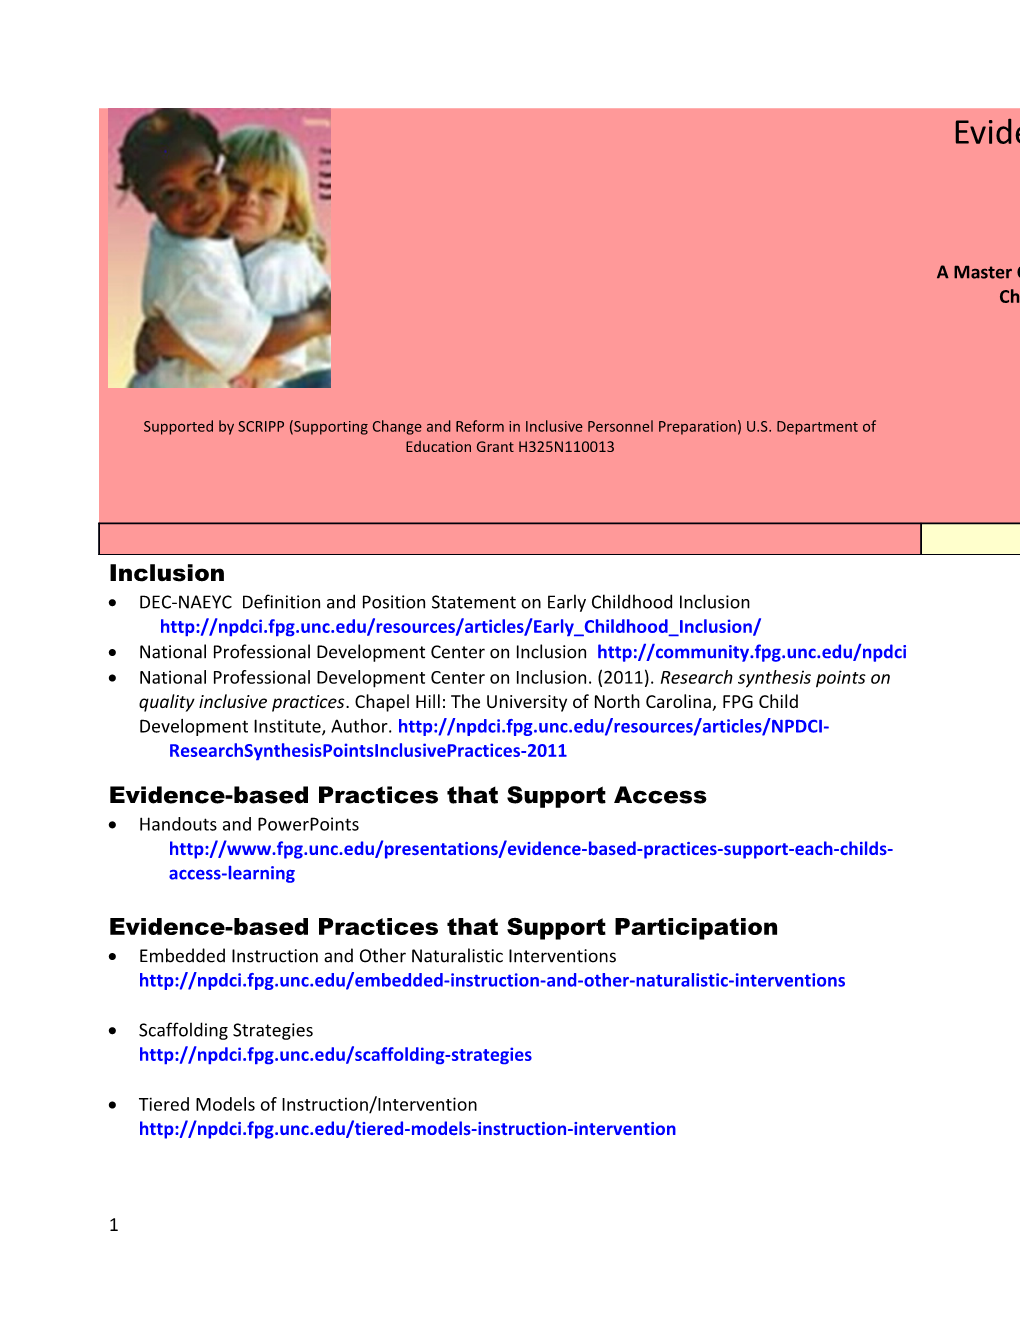 Evidence-Based Practices That Support Access